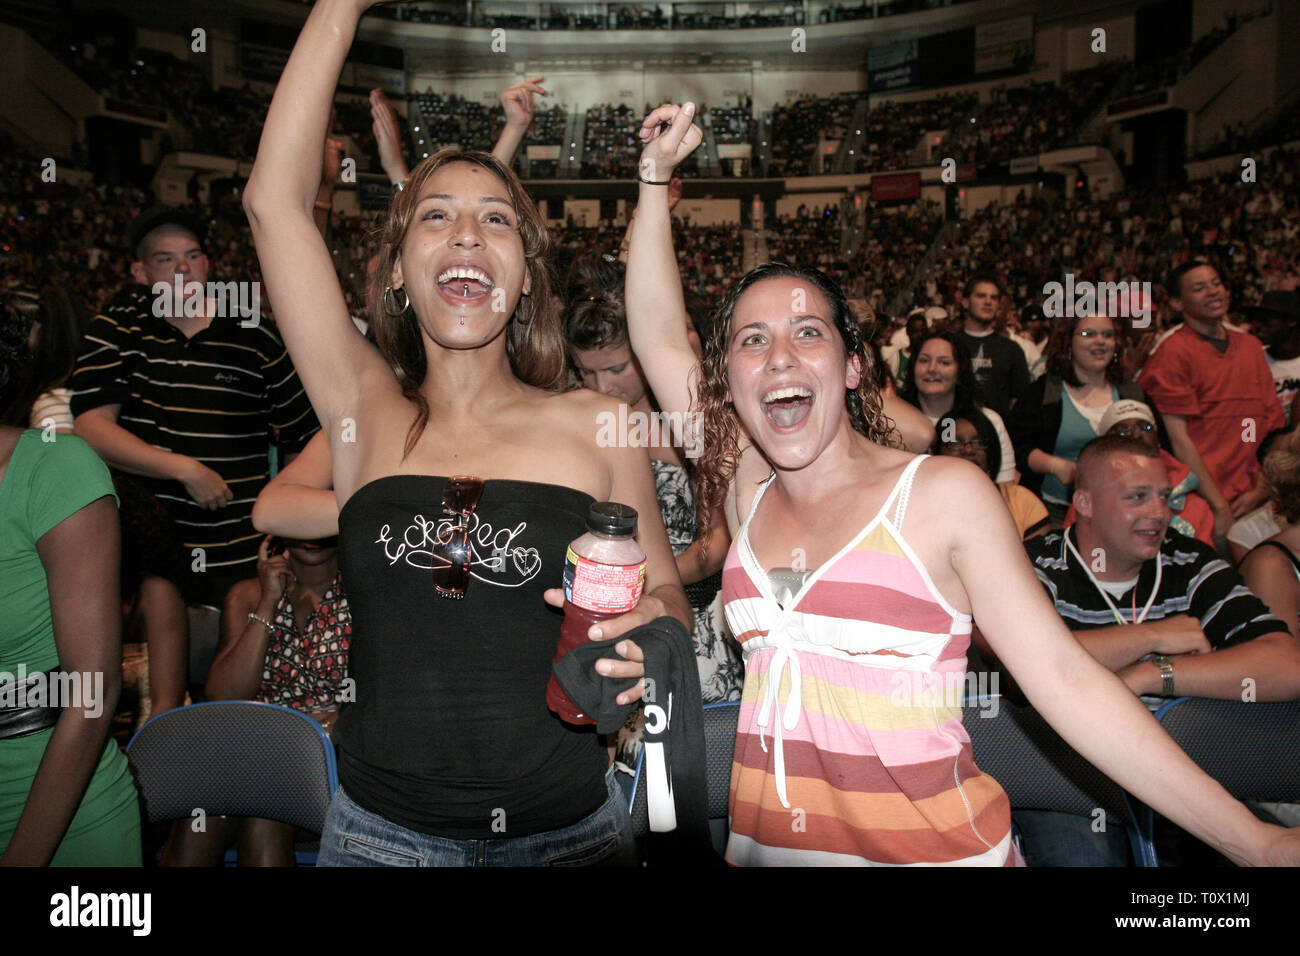 Front row concert fans are shown dancing to the music during a 'live' performance. Stock Photo